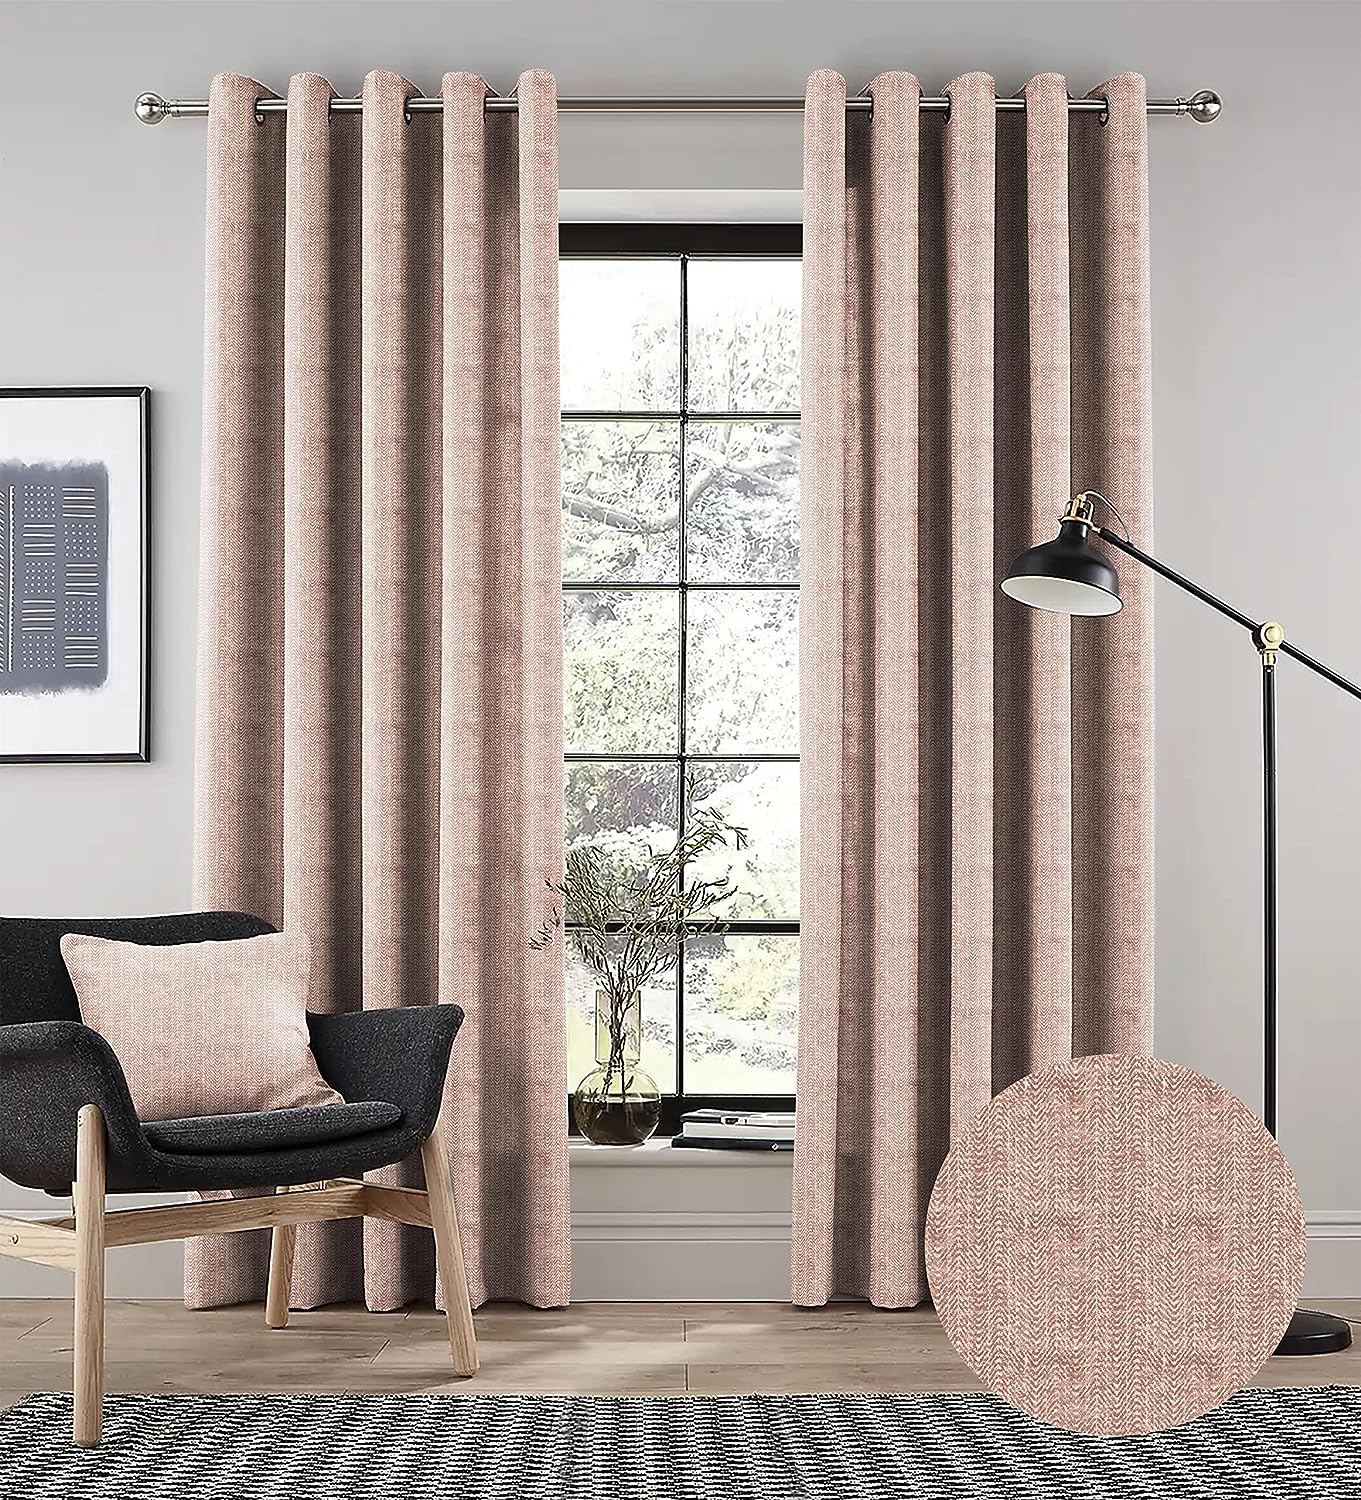 TURIN M-PINK BLACKOUT CURTAIN